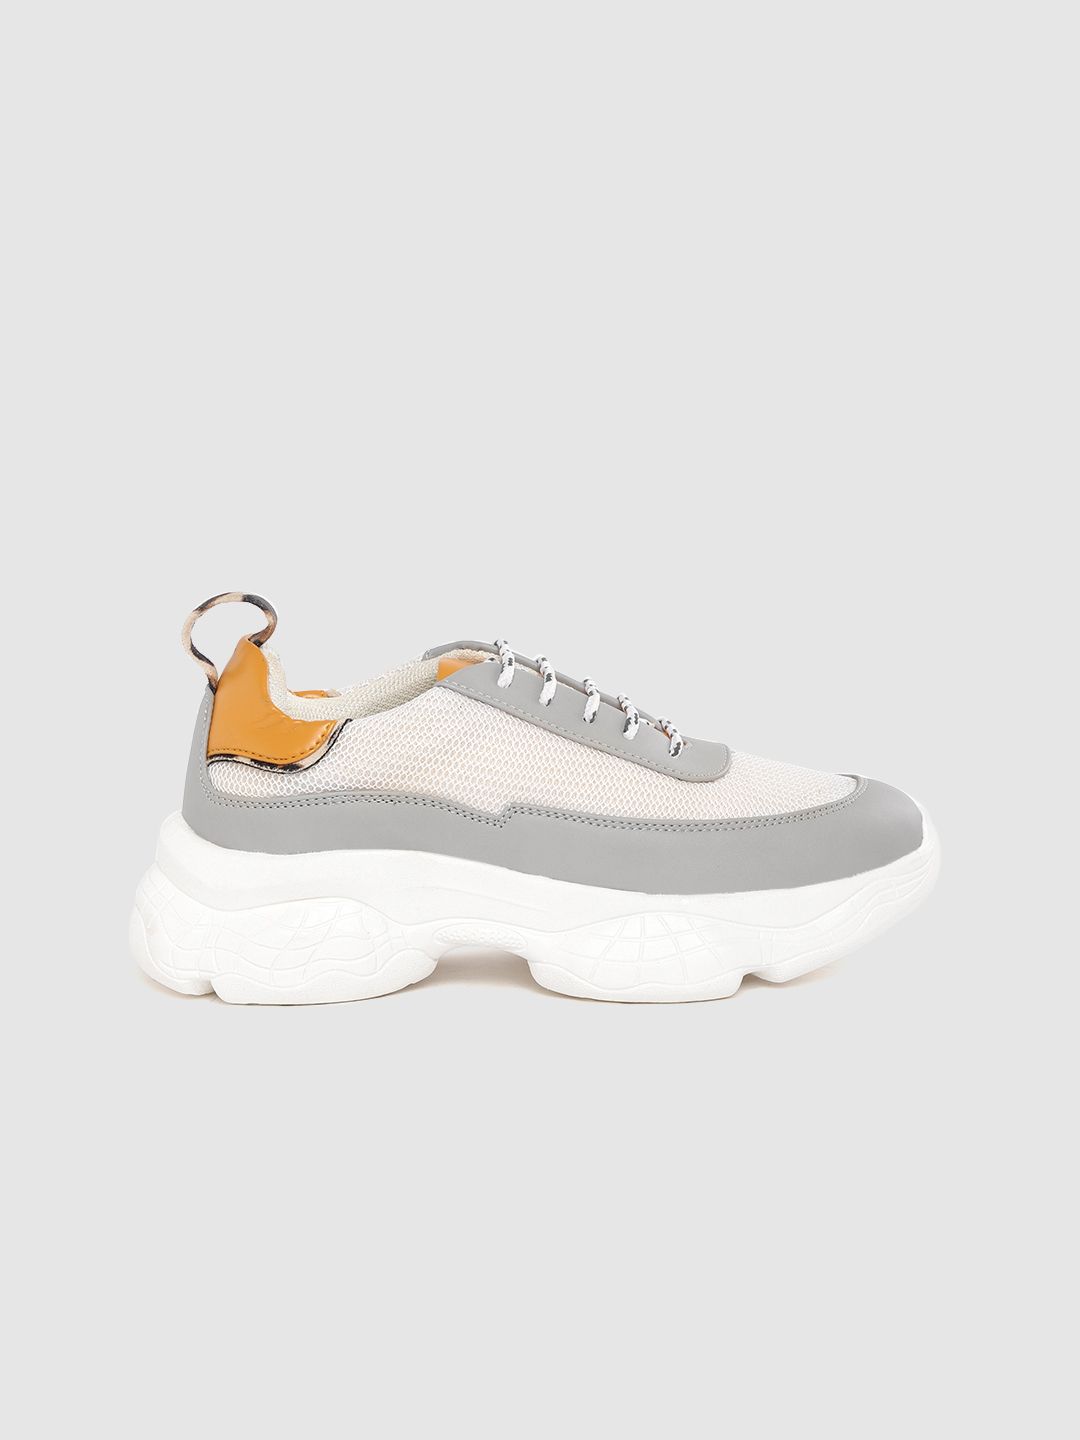 Roadster Women Off-White & Grey Colourblocked Sneakers Price in India